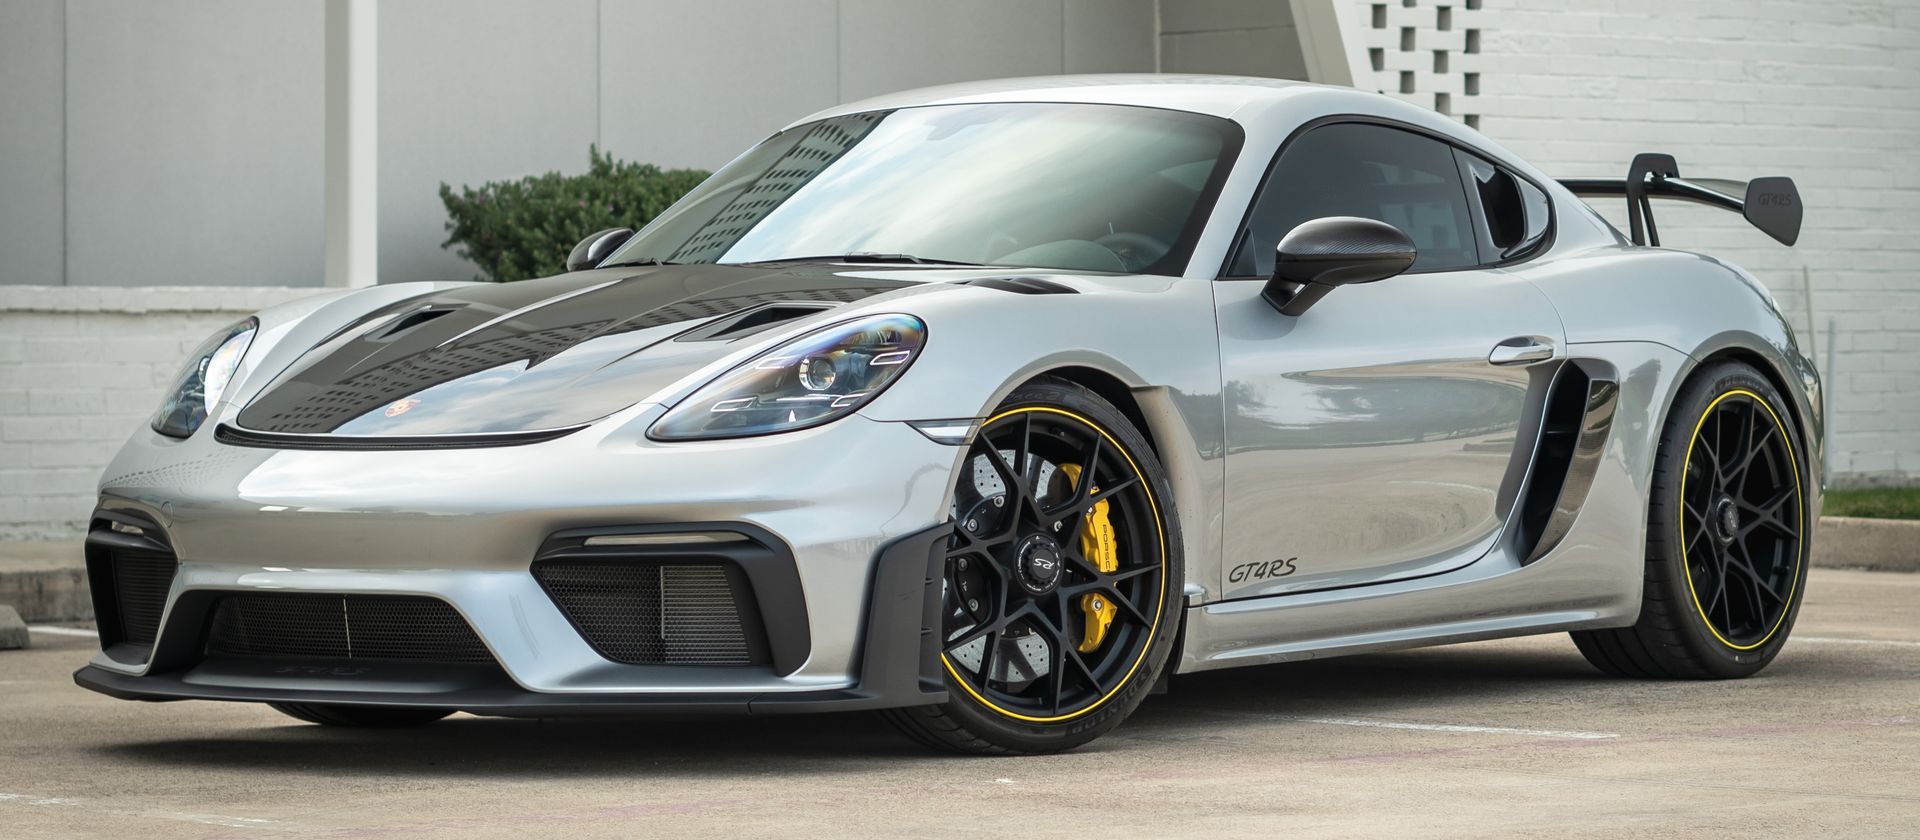 A silver porsche 911 gt4 rs is parked in a parking lot.